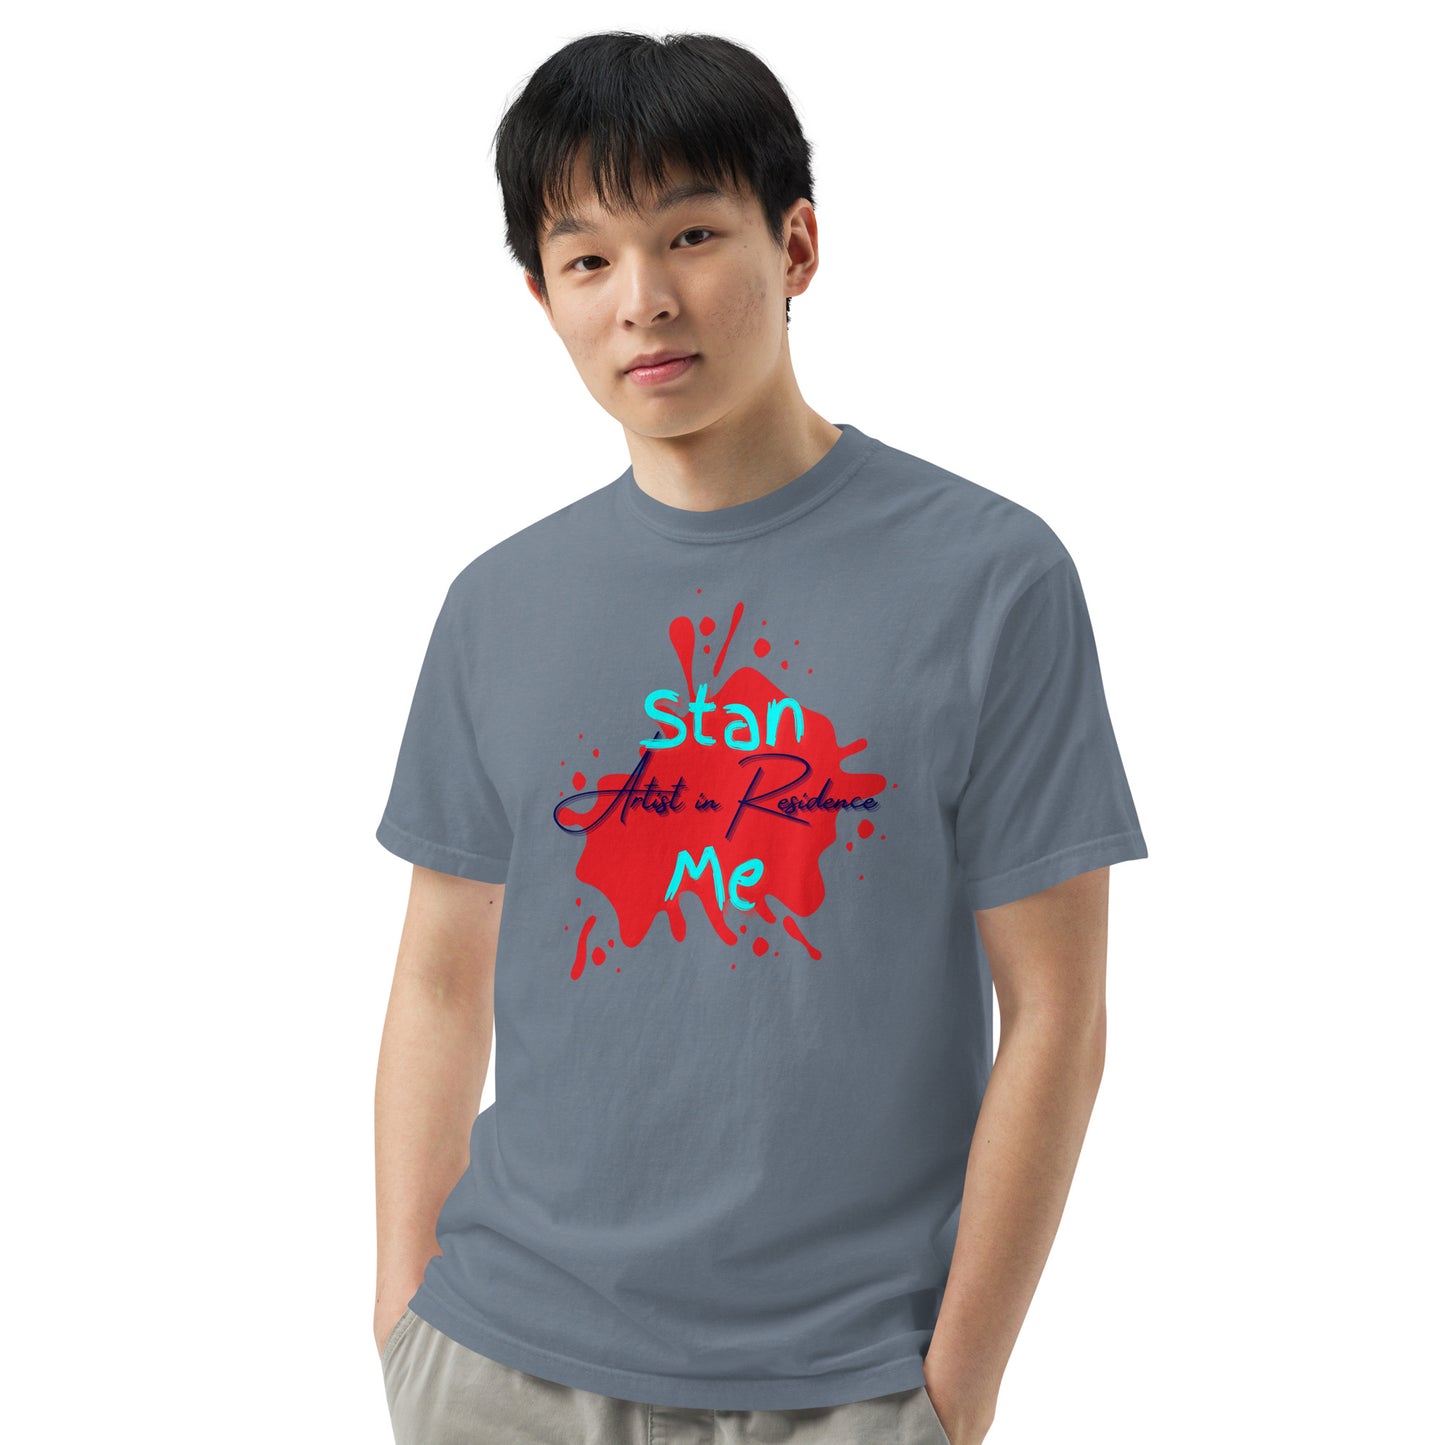 “Stan Me, Artist in Residence” tees featuring paint splatter designs, blending artistic creativity with stan culture. Available in 8 unique styles. Perfect for artists looking to attract fans and gigs. grey tee